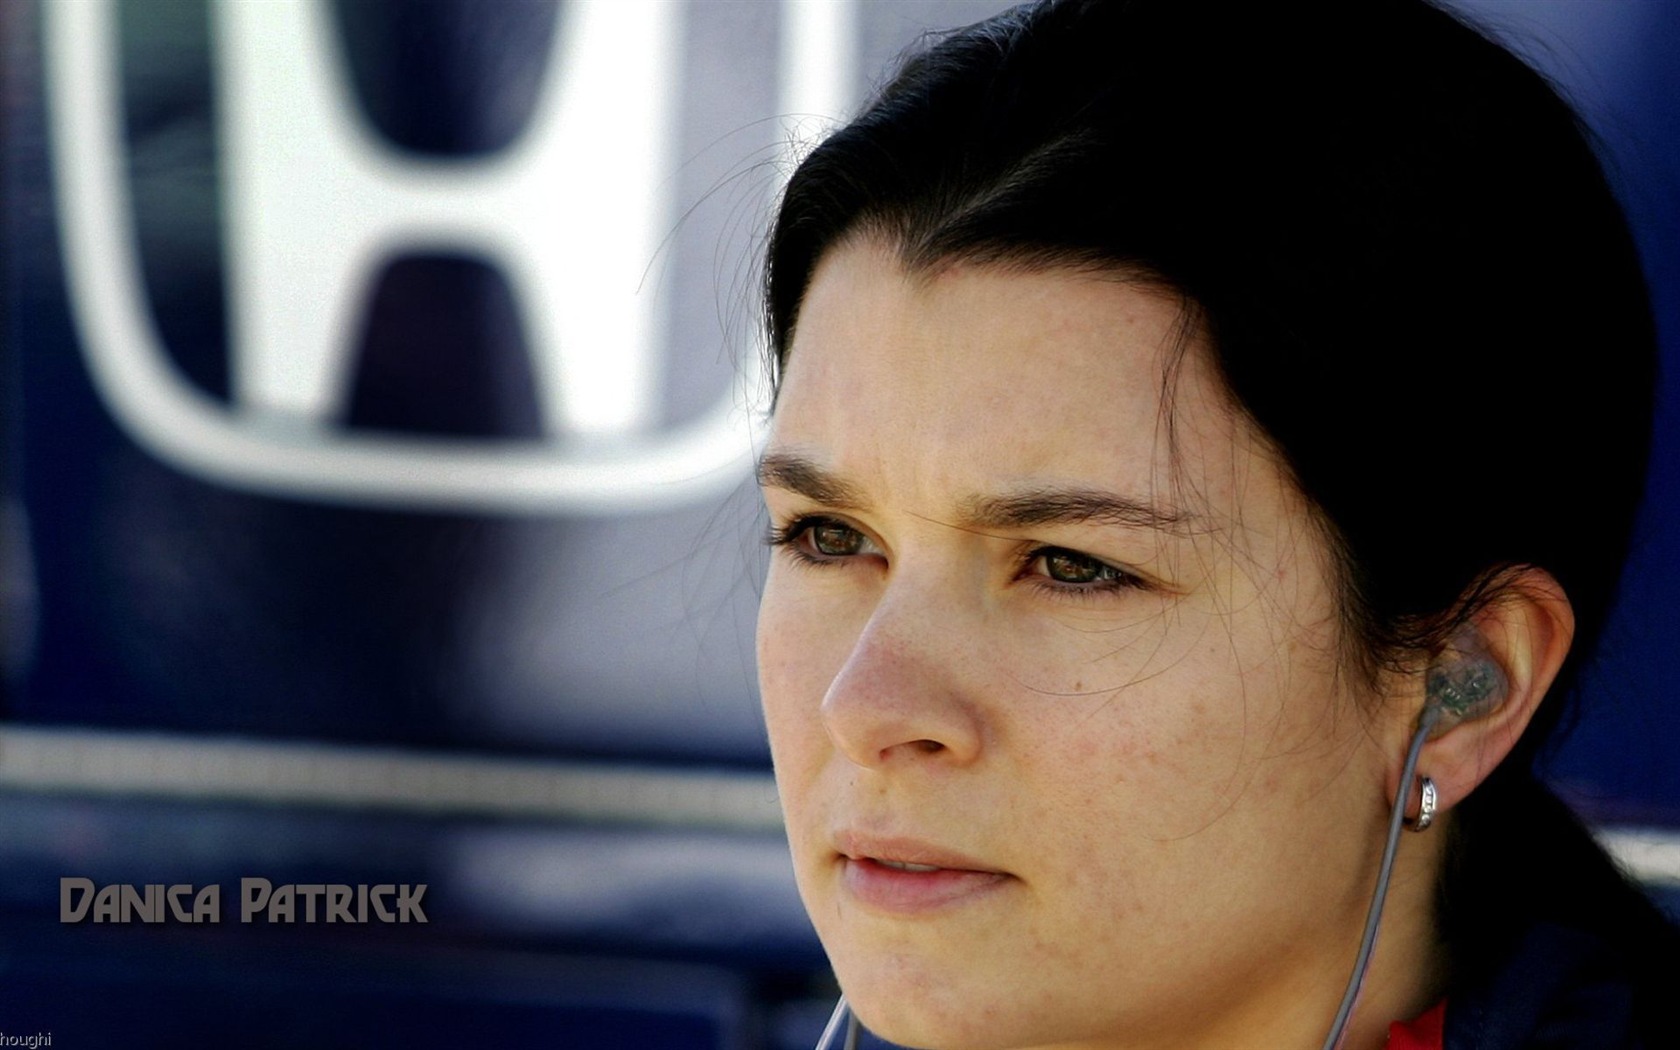 Danica Patrick #007 - 1680x1050 Wallpapers Pictures Photos Images